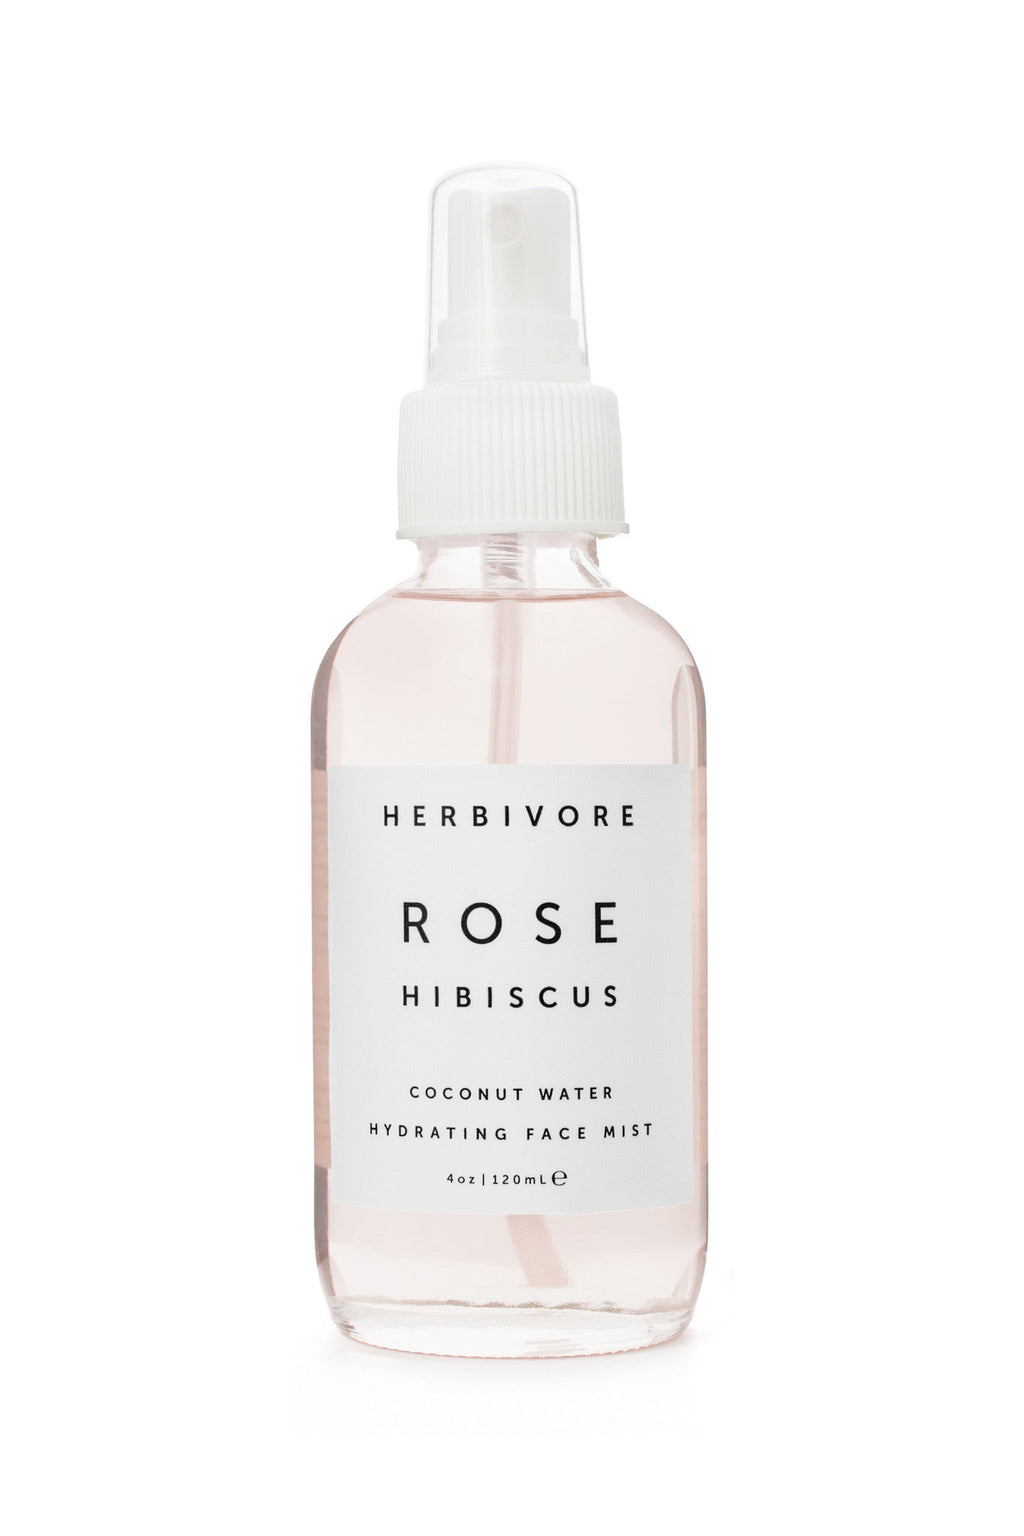 Rose Hibiscus Hydrating Face Mist - Driftwood Maui & Home By Driftwood